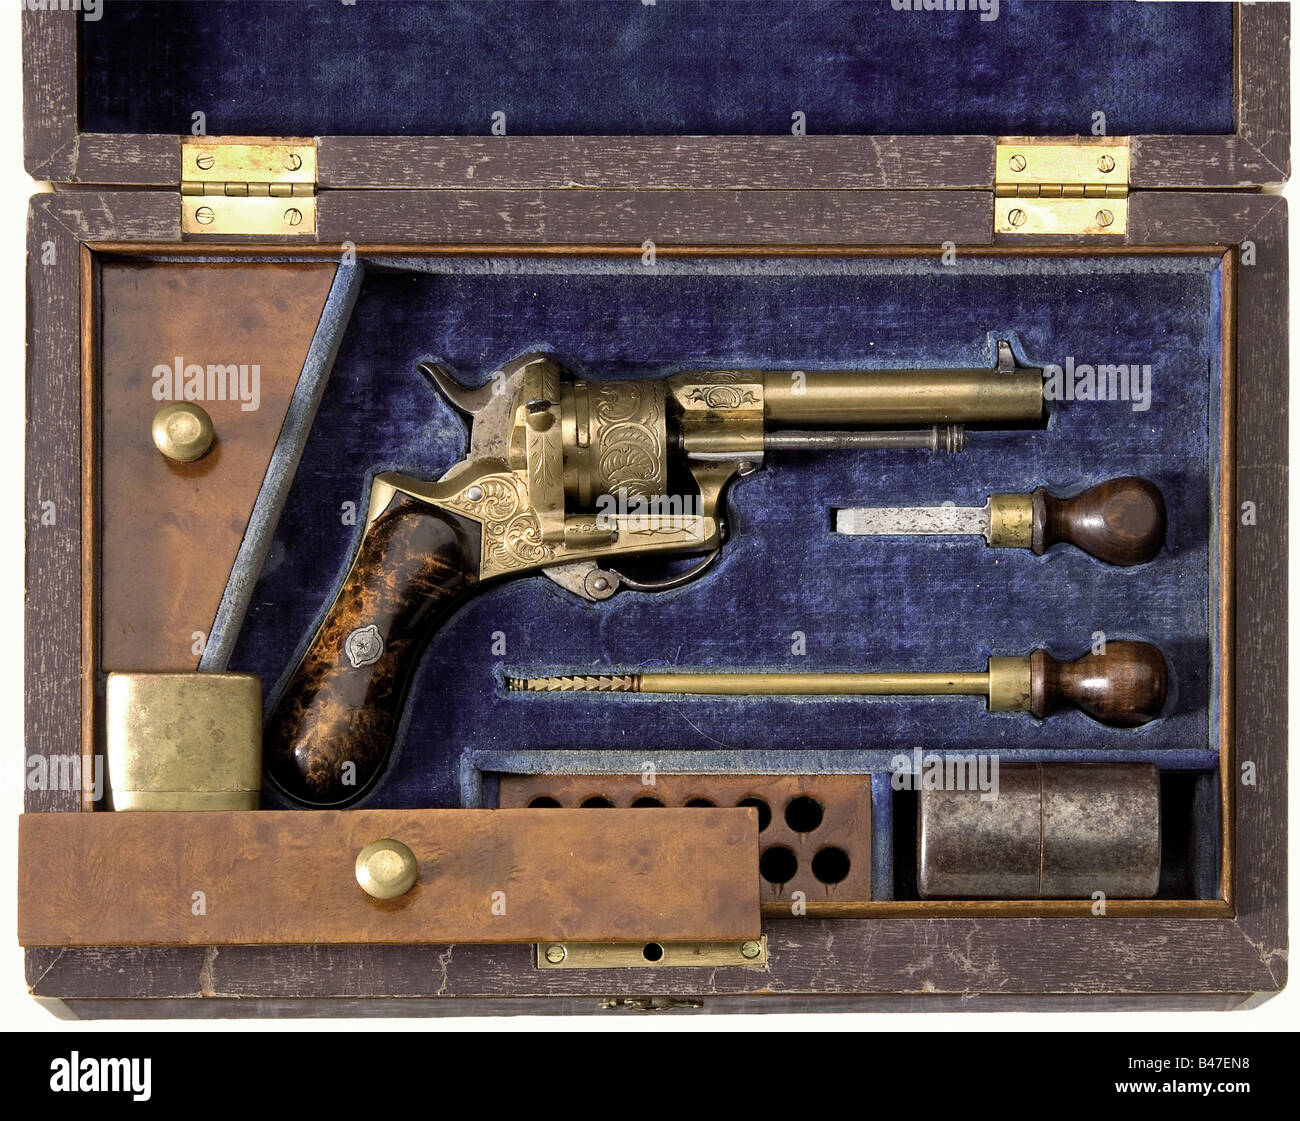 A cased bronze pinfire revolver, Liege, circa 1865. 7.5 mm Lefaucheux calibre. No number. Barrel and frame made of bronze. Round barrel, six-shot cylinder. Folding trigger. Cylinder, frame, and barrel base have finely engraved rocaille ornamentation. The grip panels are made of Thuja root-wood. The iron pieces are lightly pitted in places. Length 18 cm. In a wooden case lined with blue velvet and containing accessories. The exterior is decorated with marquetry. The corners are light bone. Key missing. Dimensions 29 x 19 x 8.5 cm. Erwerbsscheinpflichtig. histori, Stock Photo